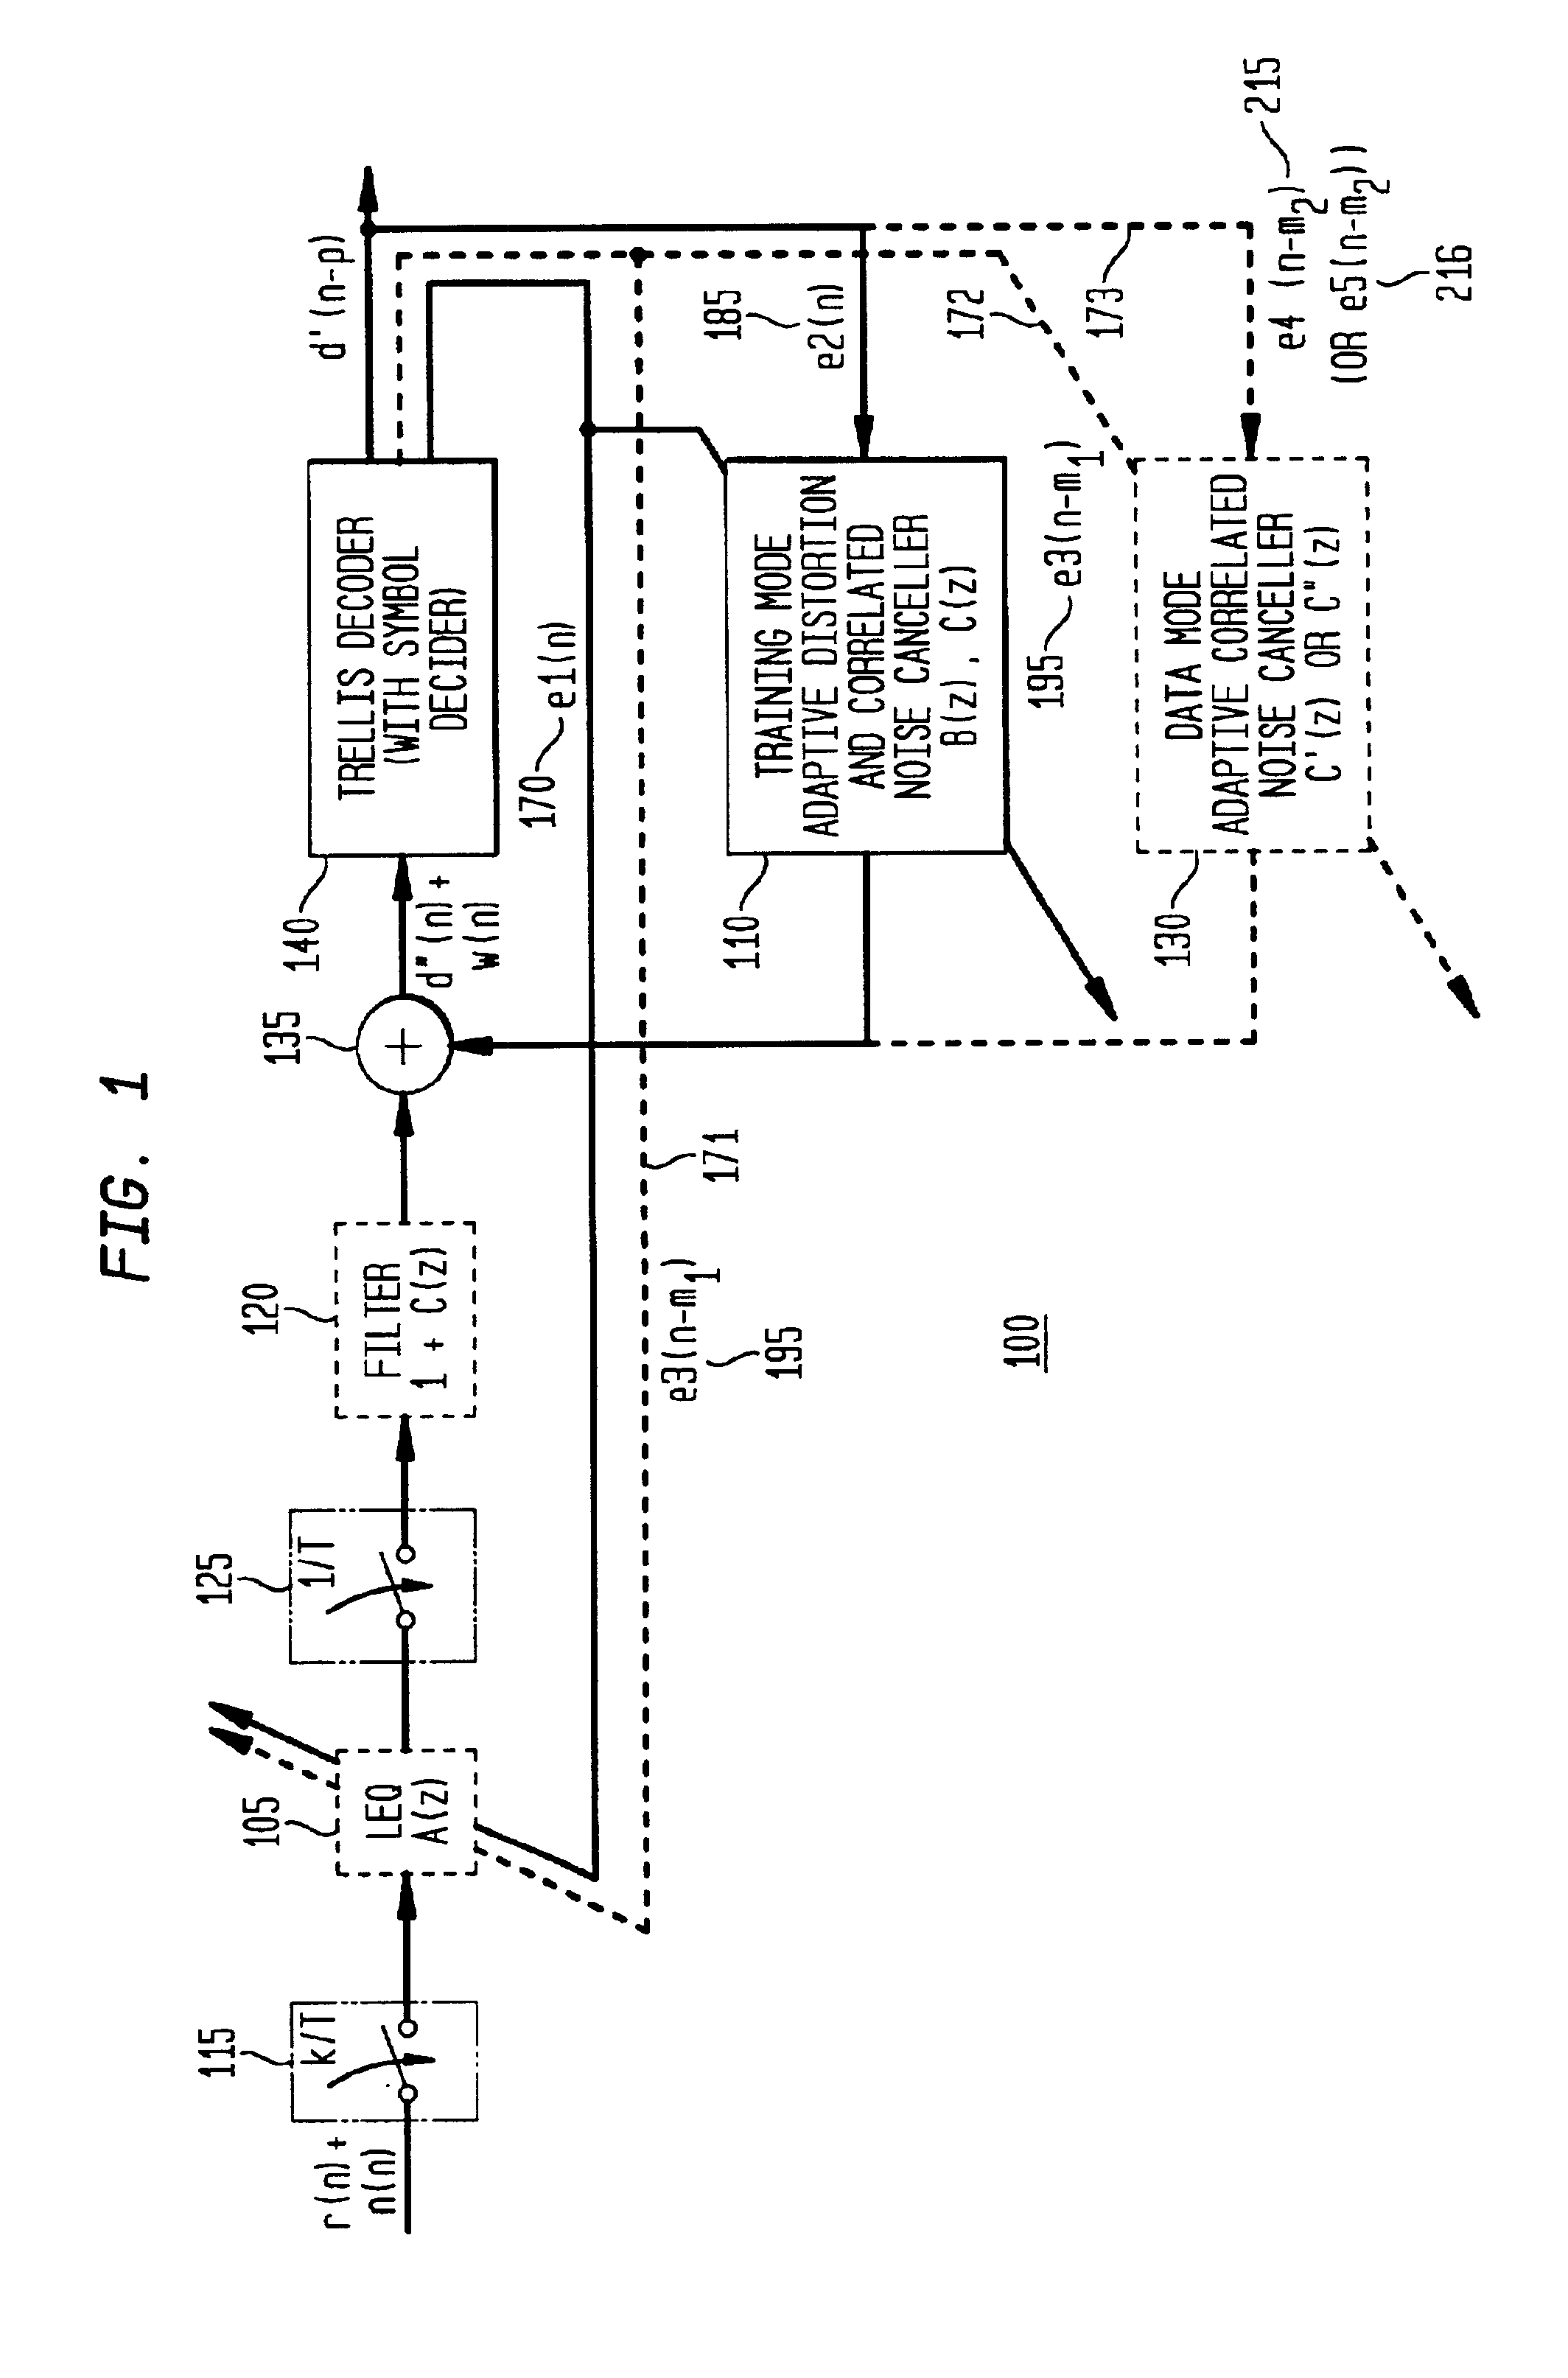 Apparatus, method and system for correlated noise reduction in a trellis coded environment